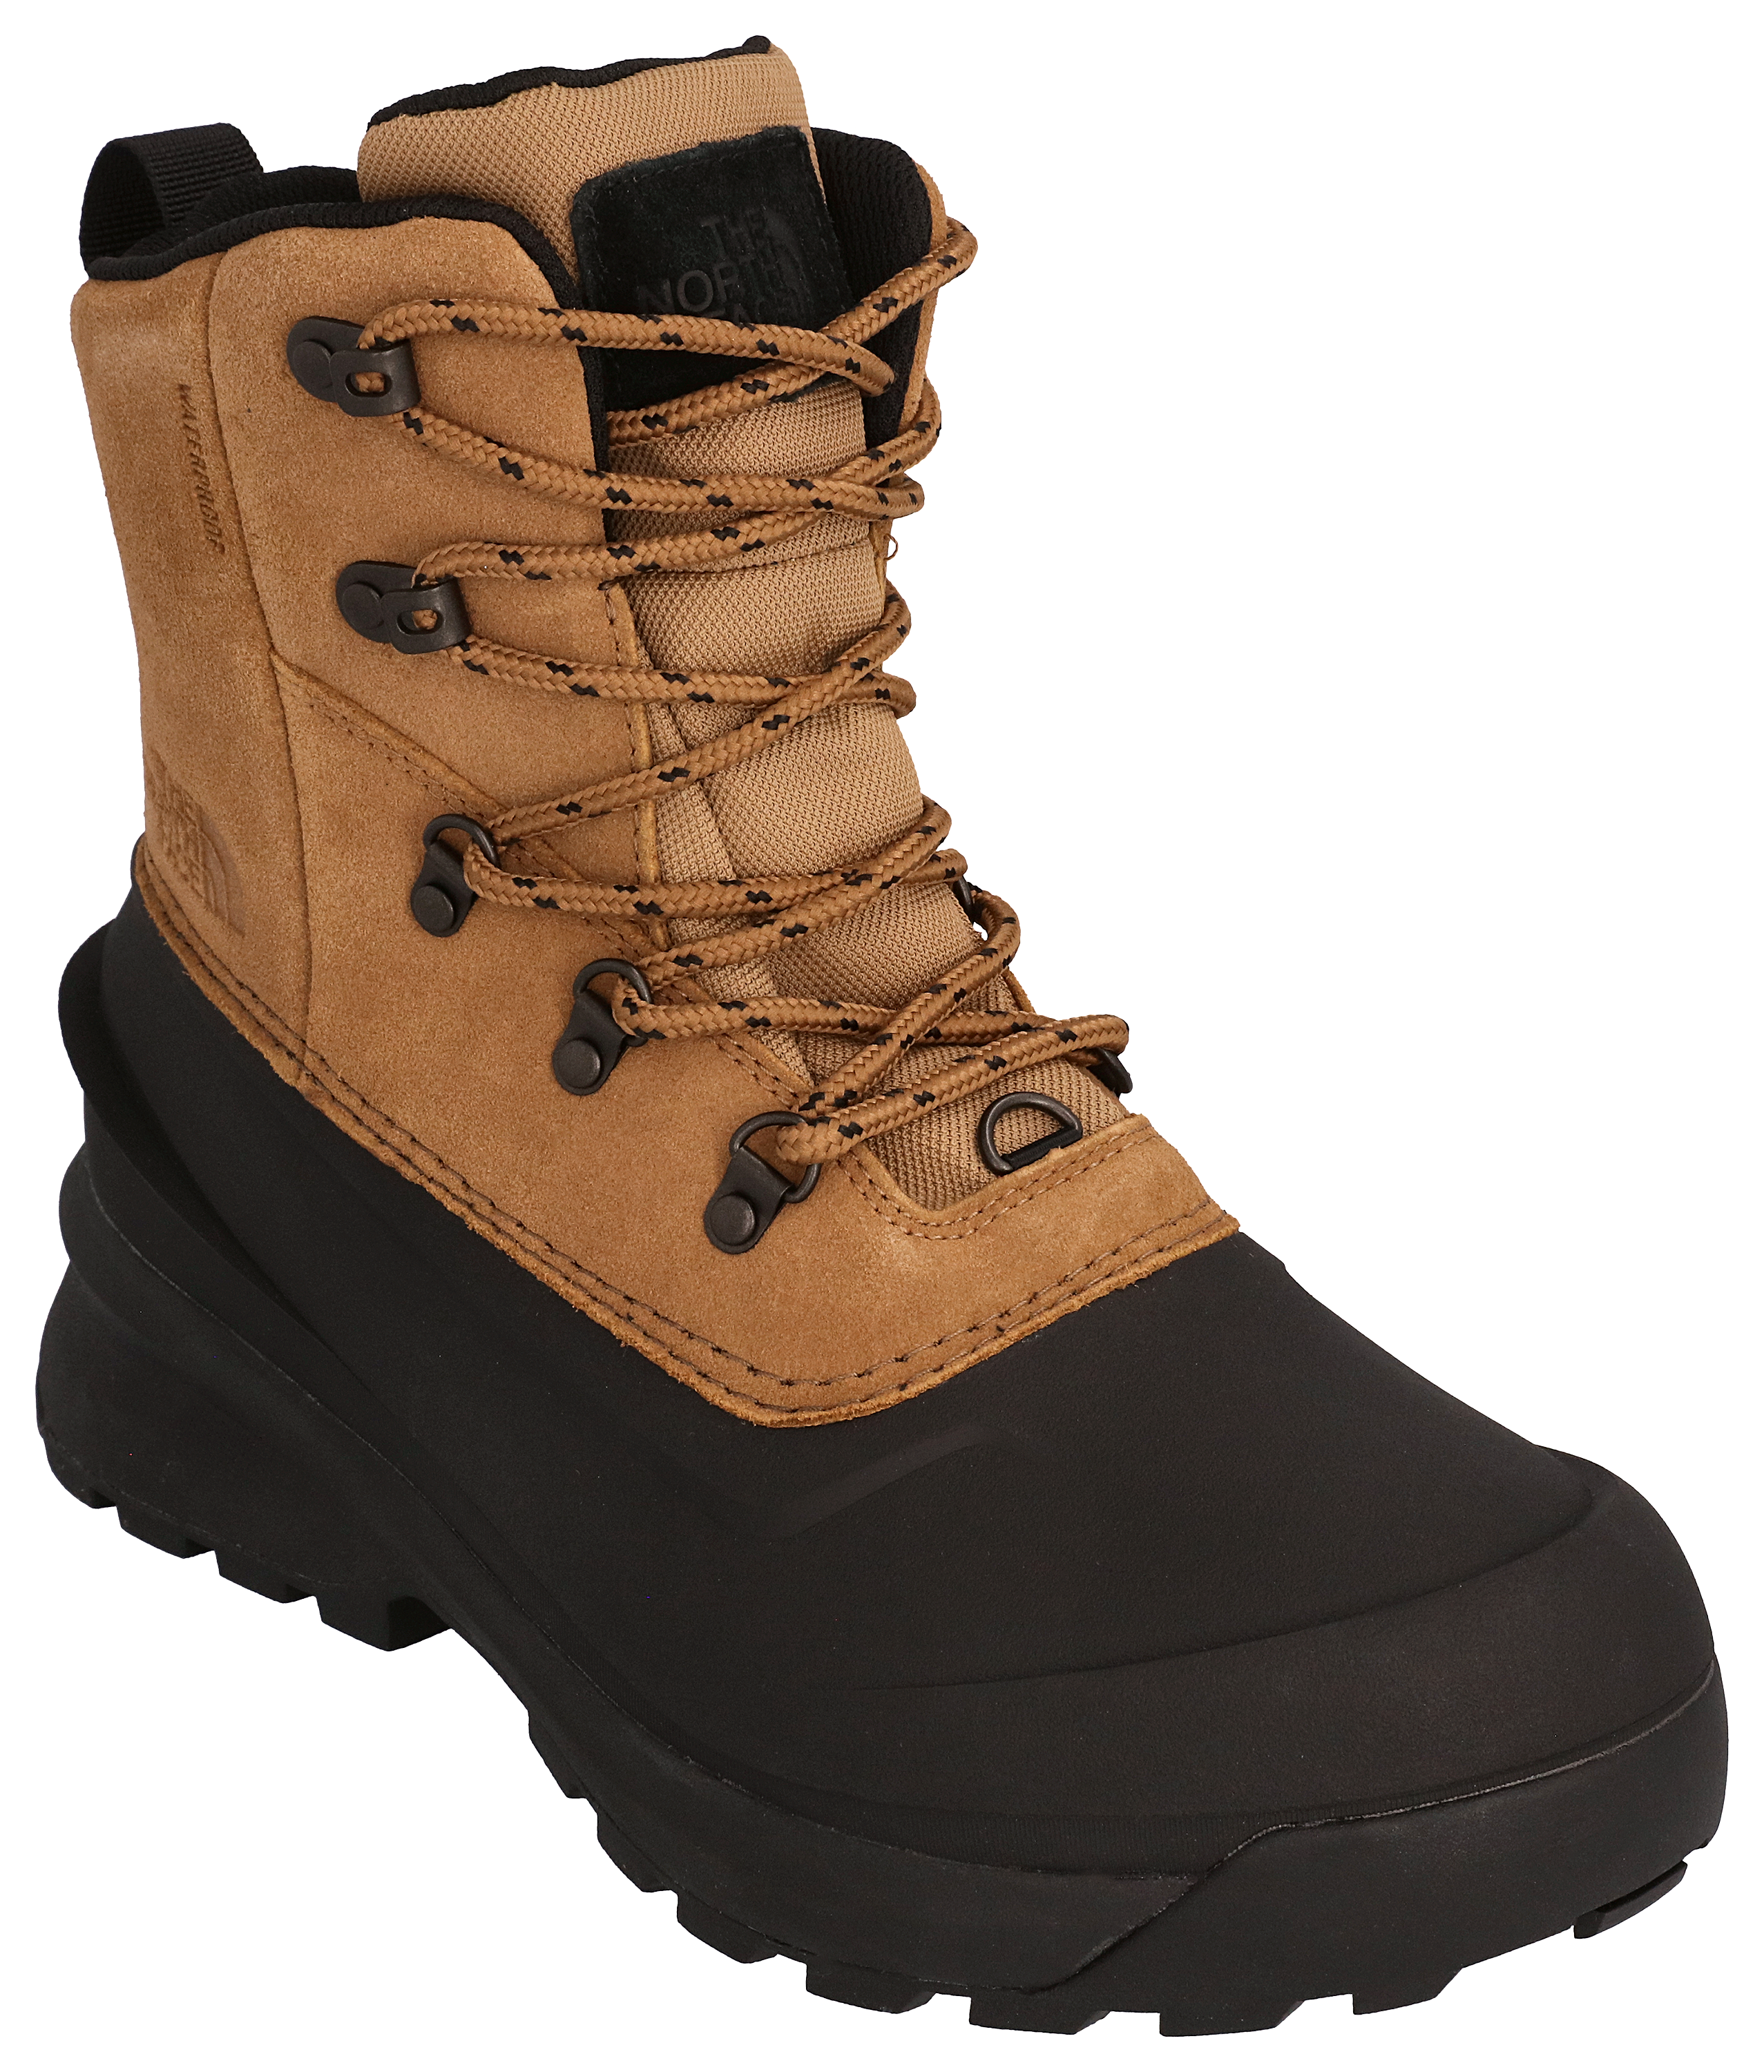 The North Face Chilkat V Lace Insulated Waterproof Pac Boots for Men